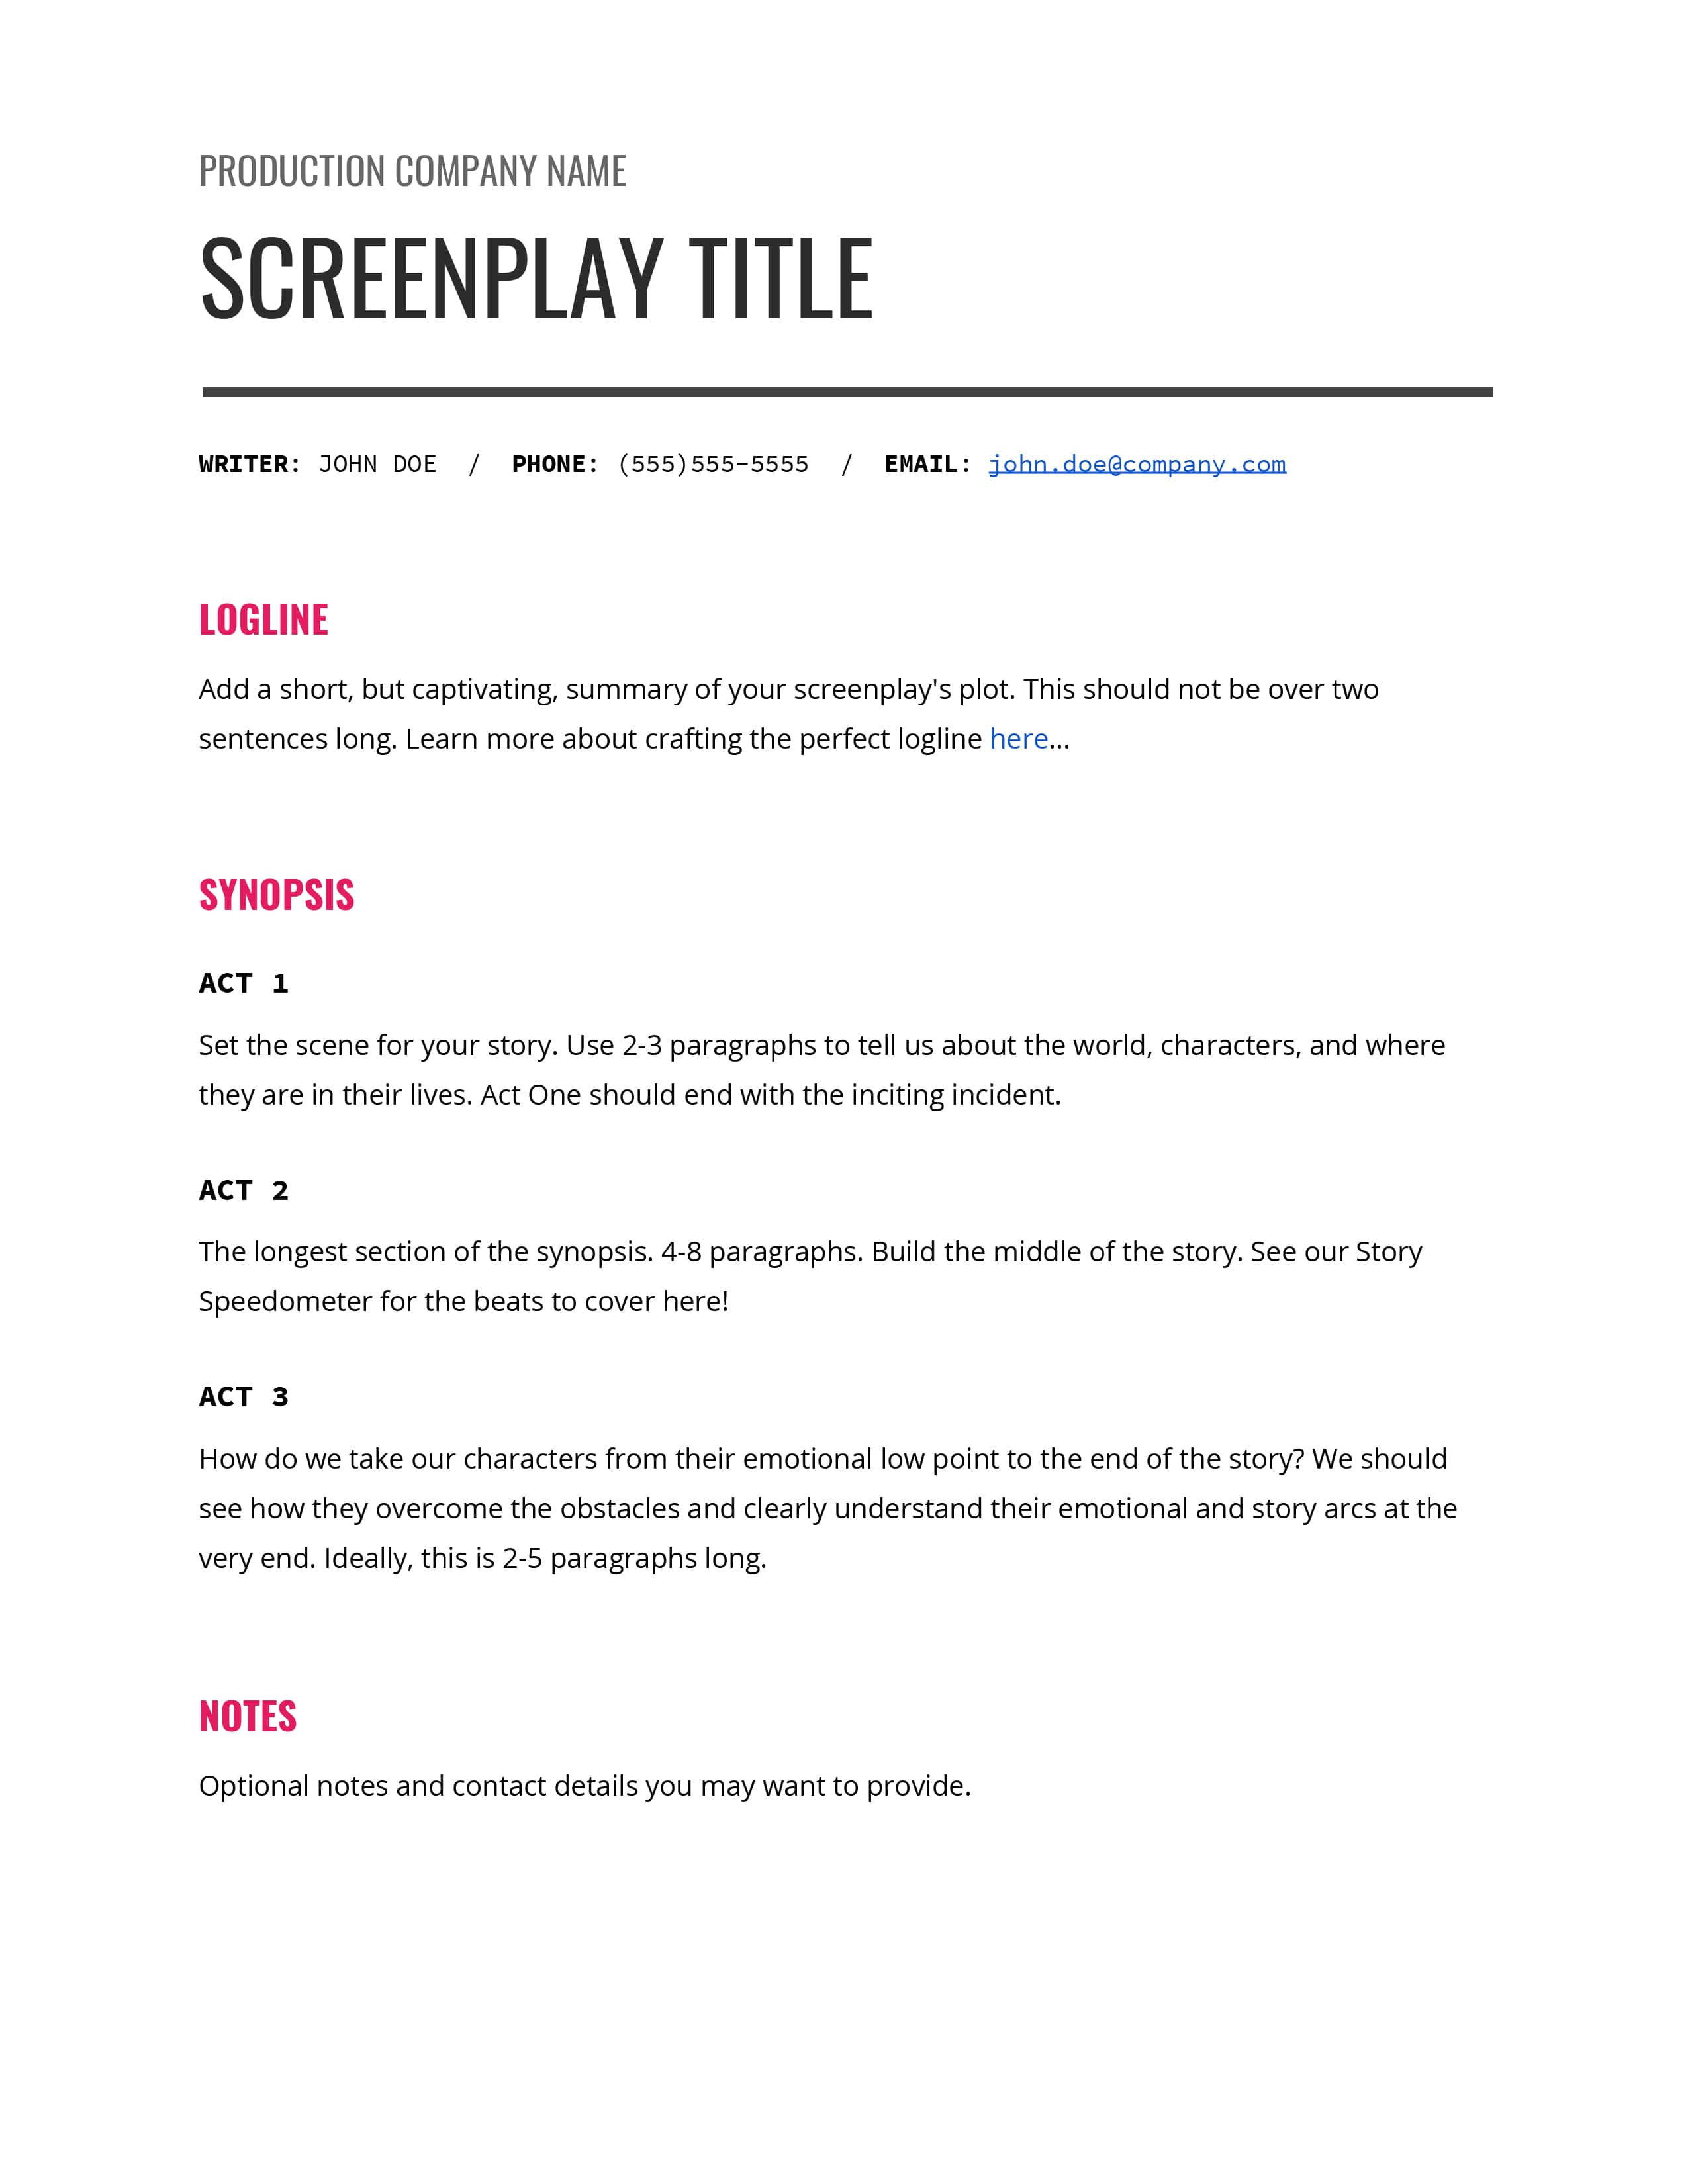 How to Write a Movie Synopsis that Sells [FREE Movie Synopsis Template]